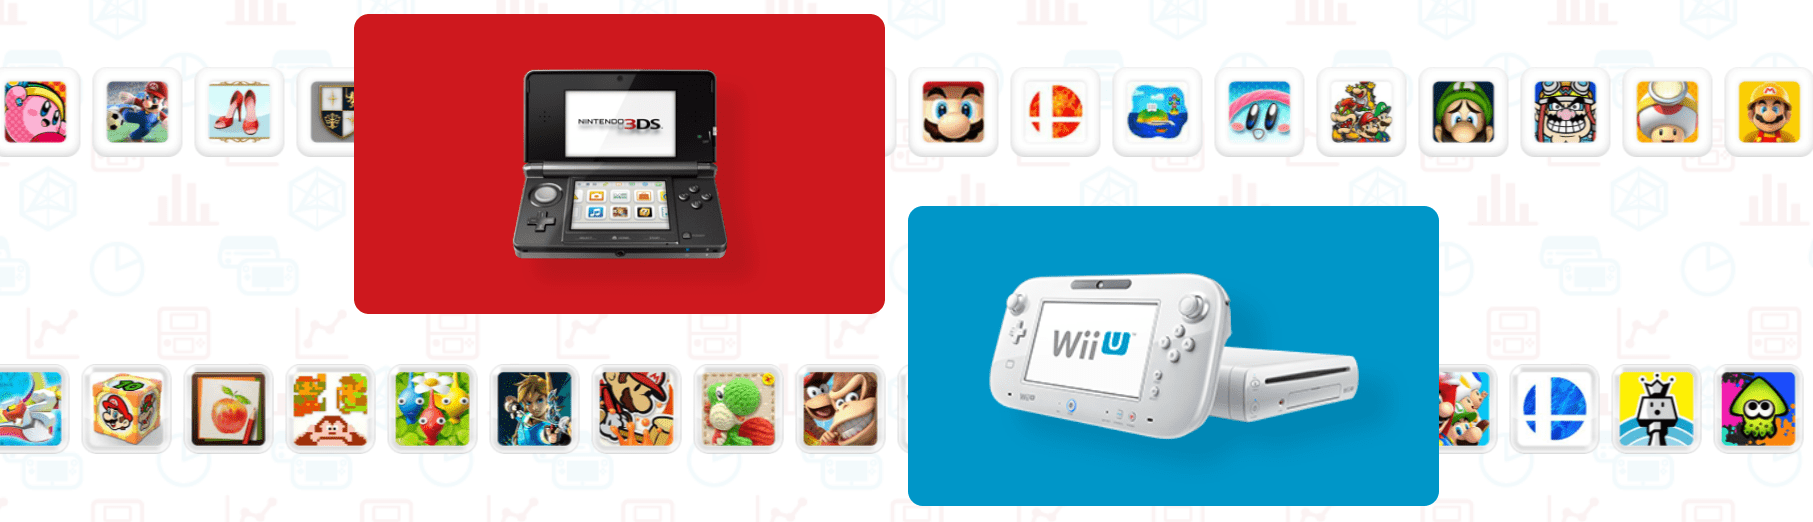 Nintendo is shutting down the 3DS and Wii U eShops in late March 2023